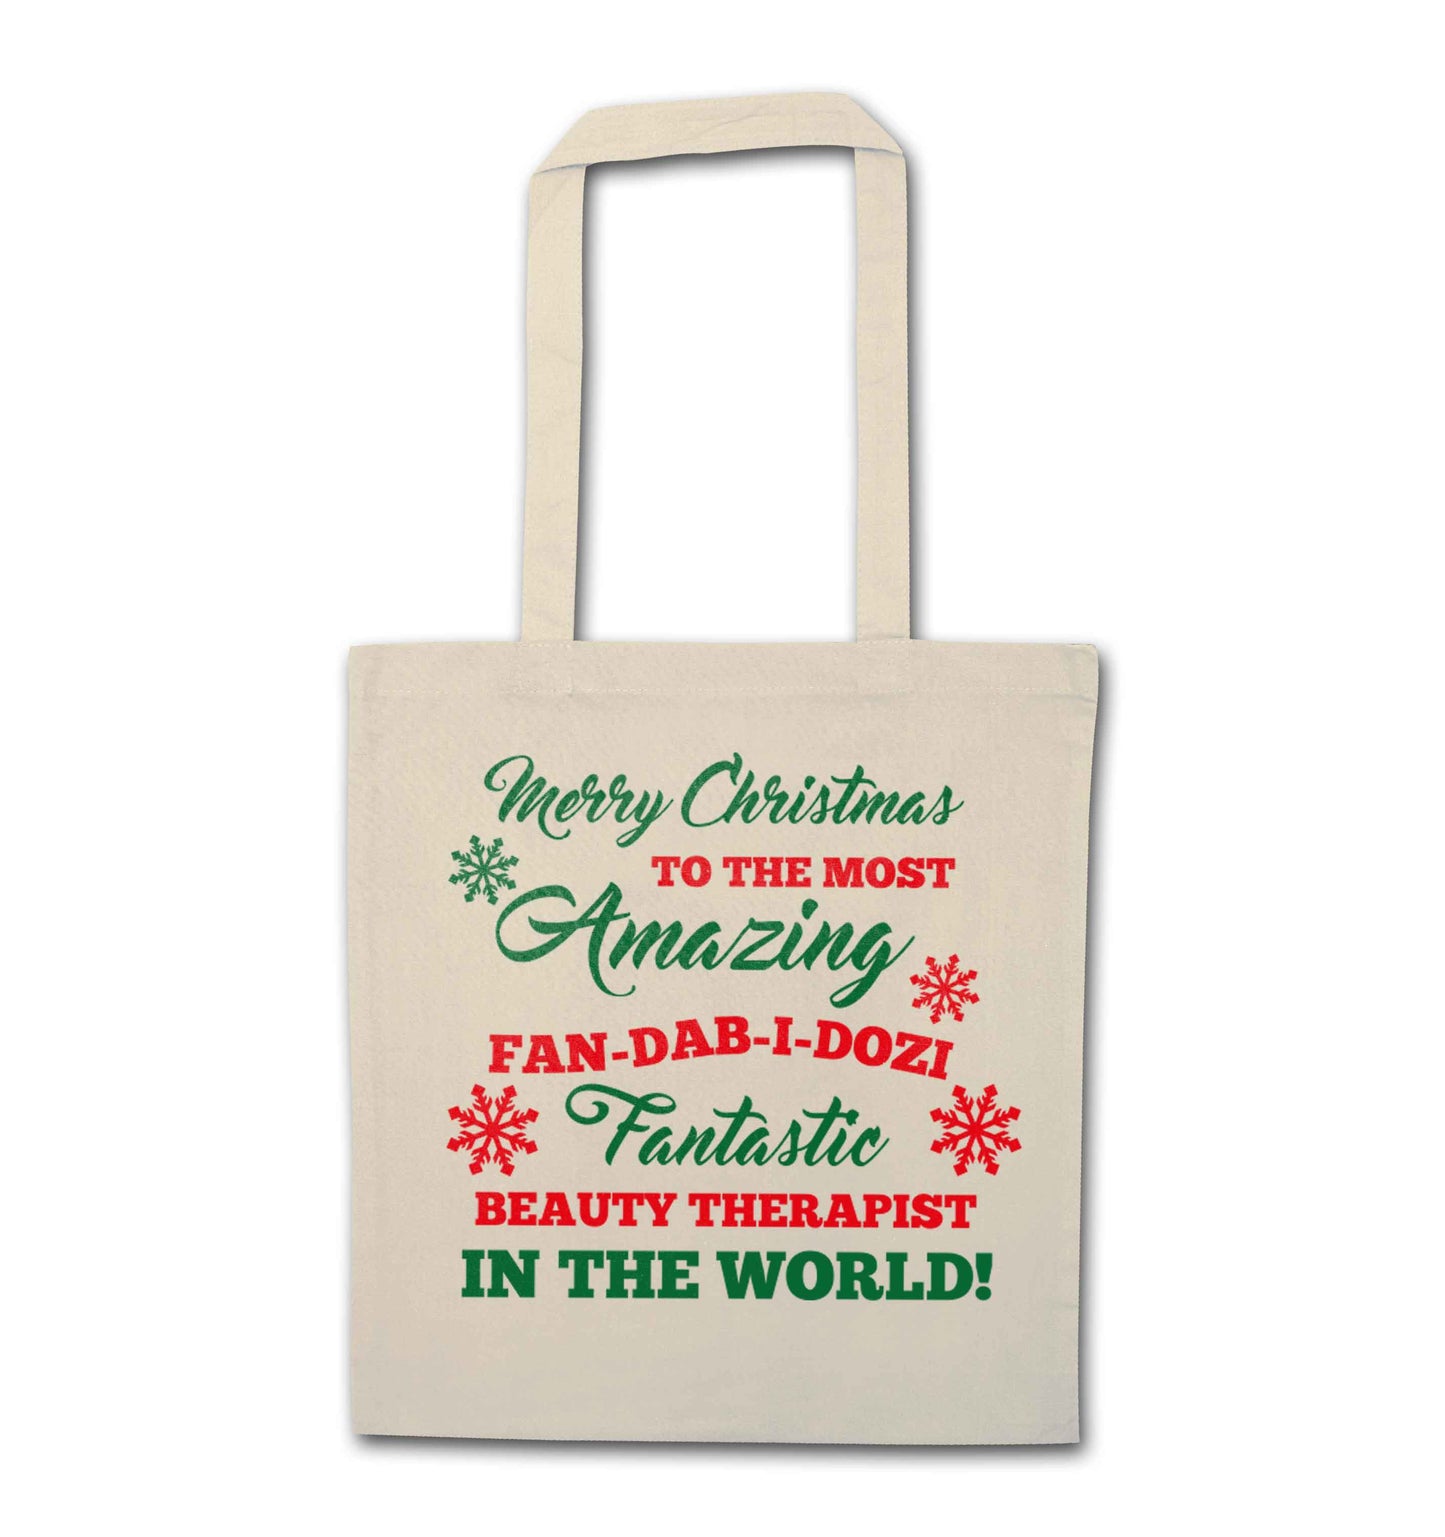 Merry Christmas to the most amazing fan-dab-i-dozi fantasic beauty therapist in the world natural tote bag